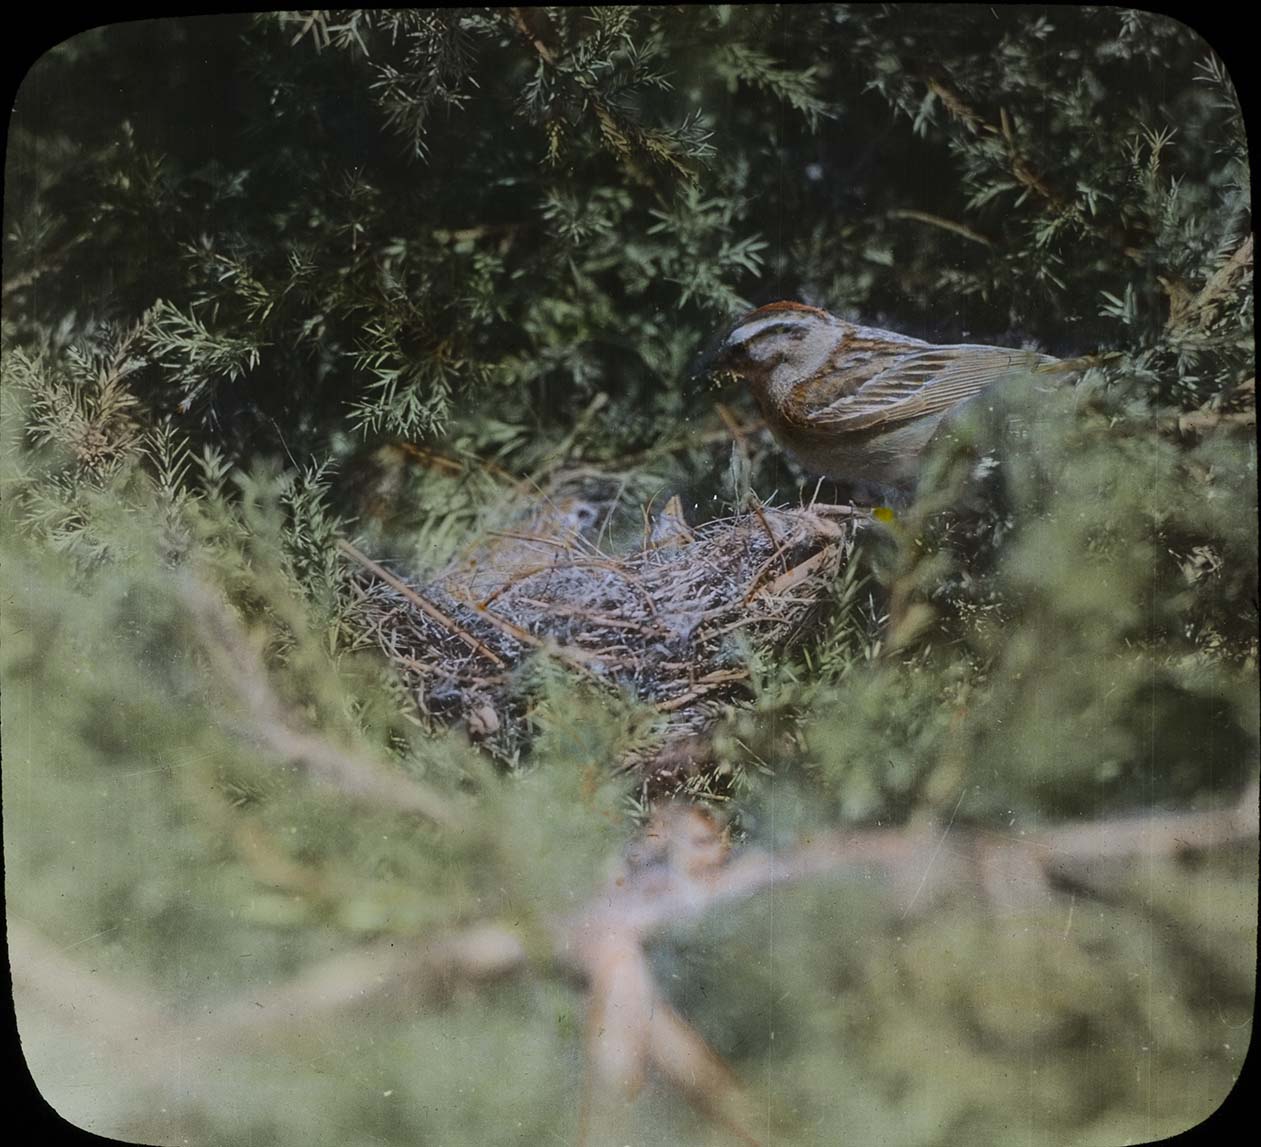 Lantern slide and photograph of a Chipping Sparrow at her nest